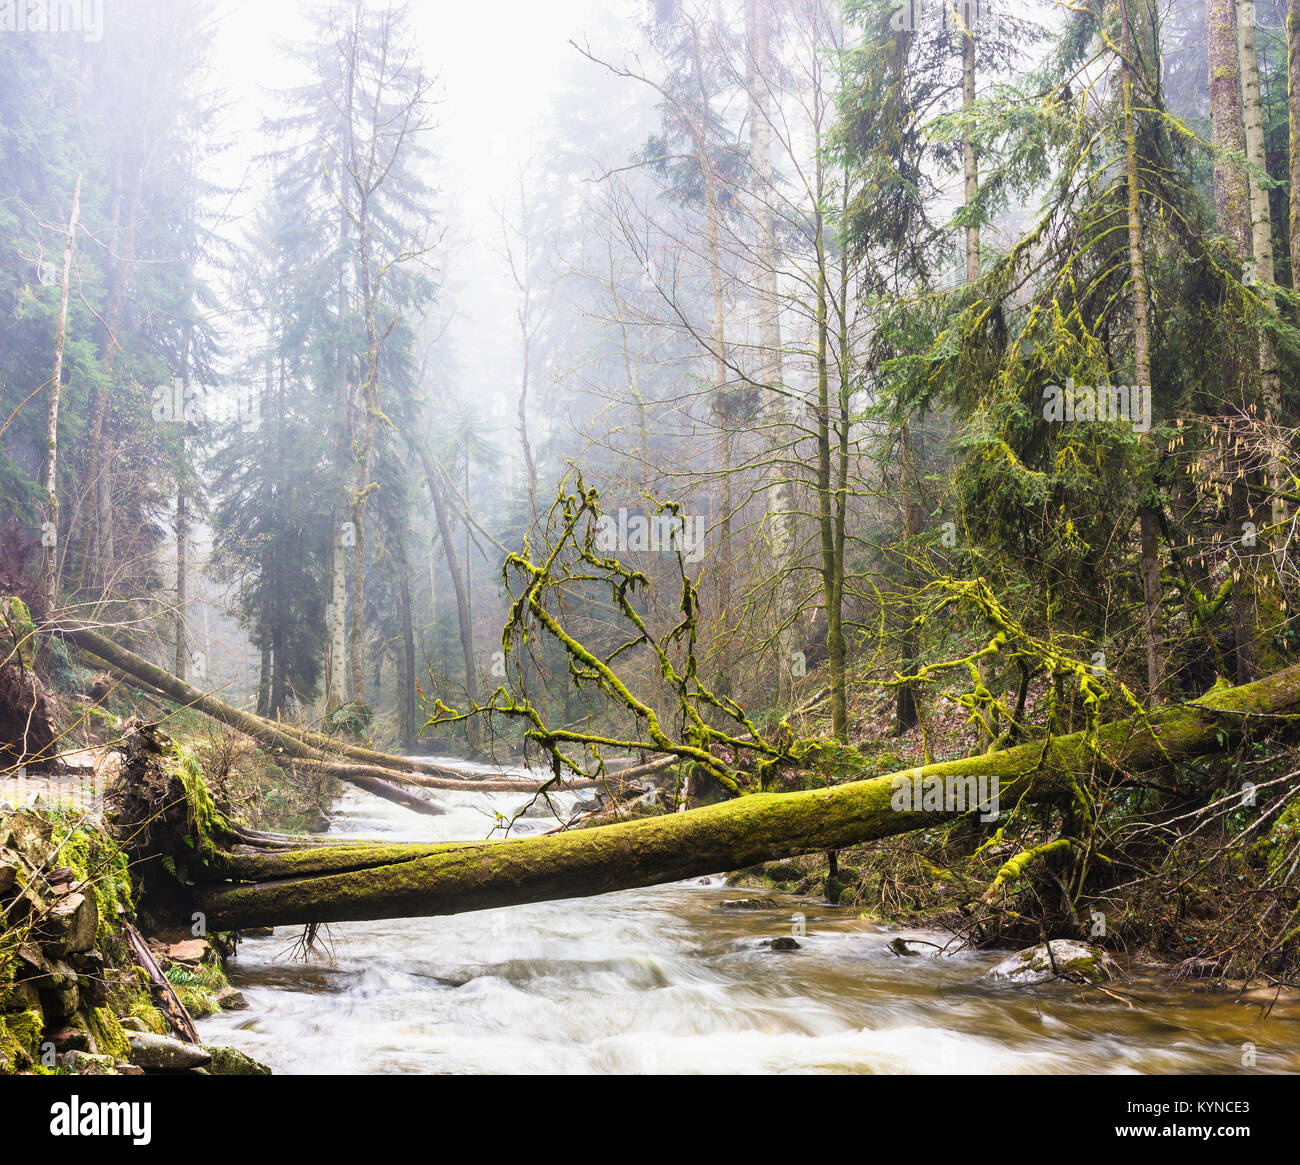 Some fallen trees after a storm over a river in the woods, Vosges, France. Stock Photo